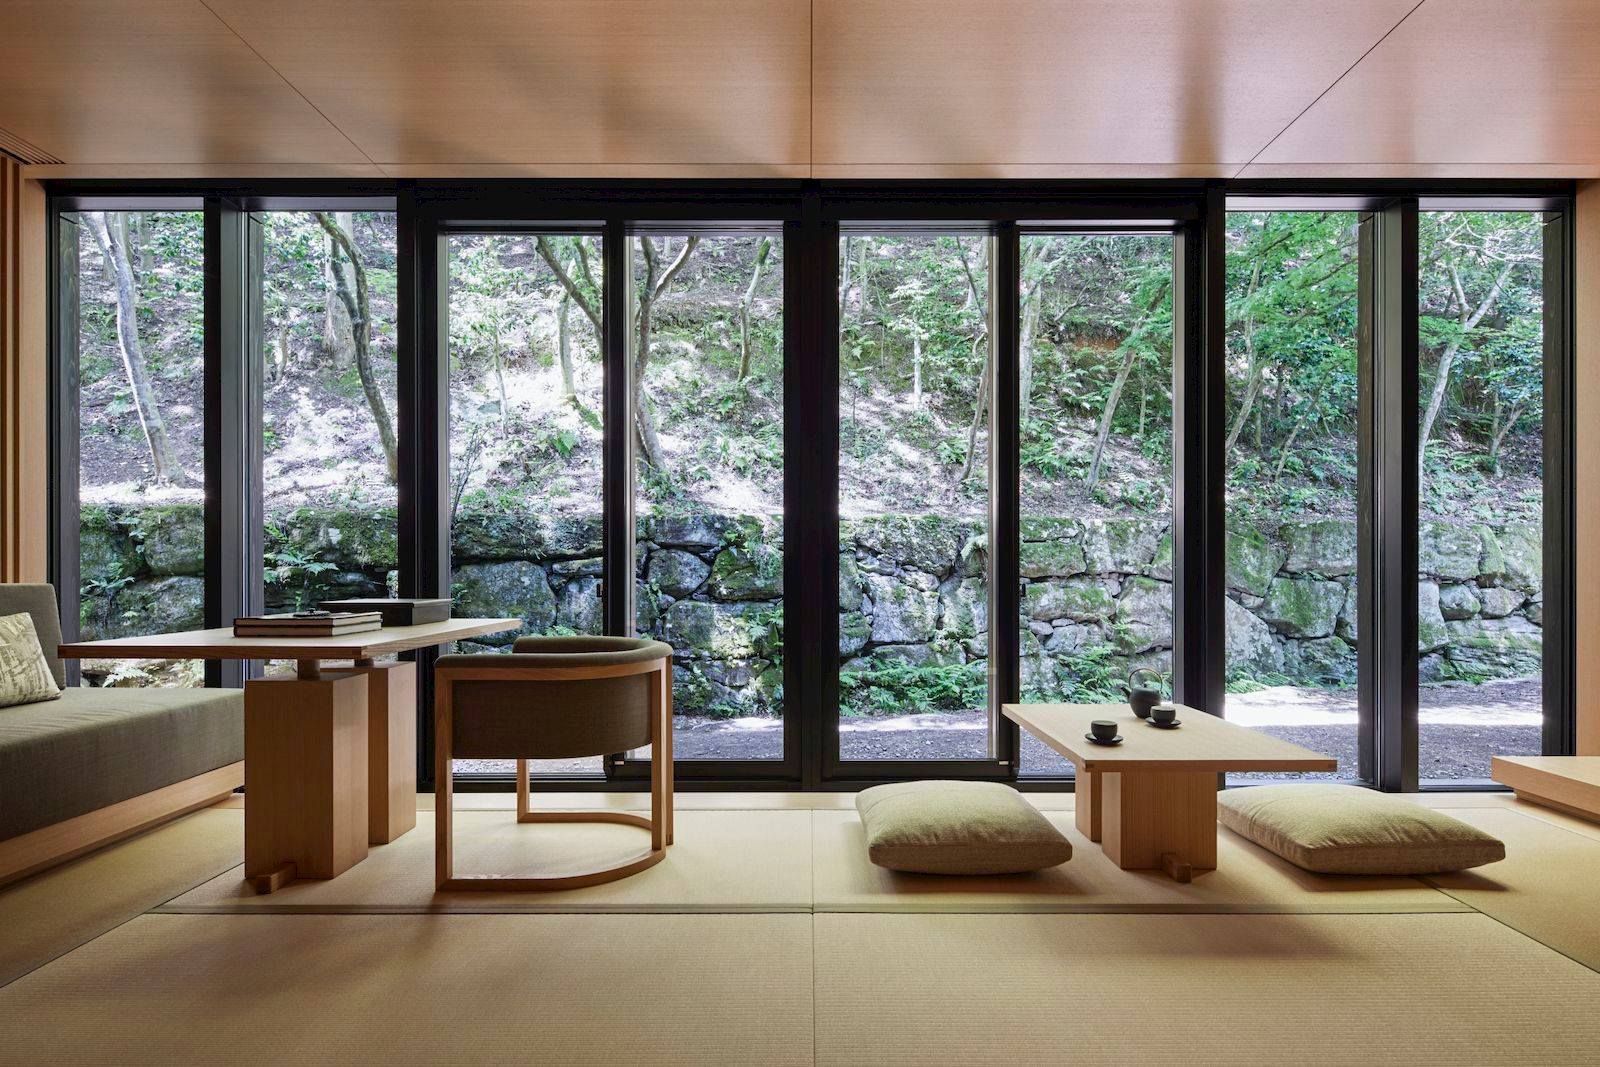 Aman Kyoto is located in a secret garden that floods the senses and fills the spirit